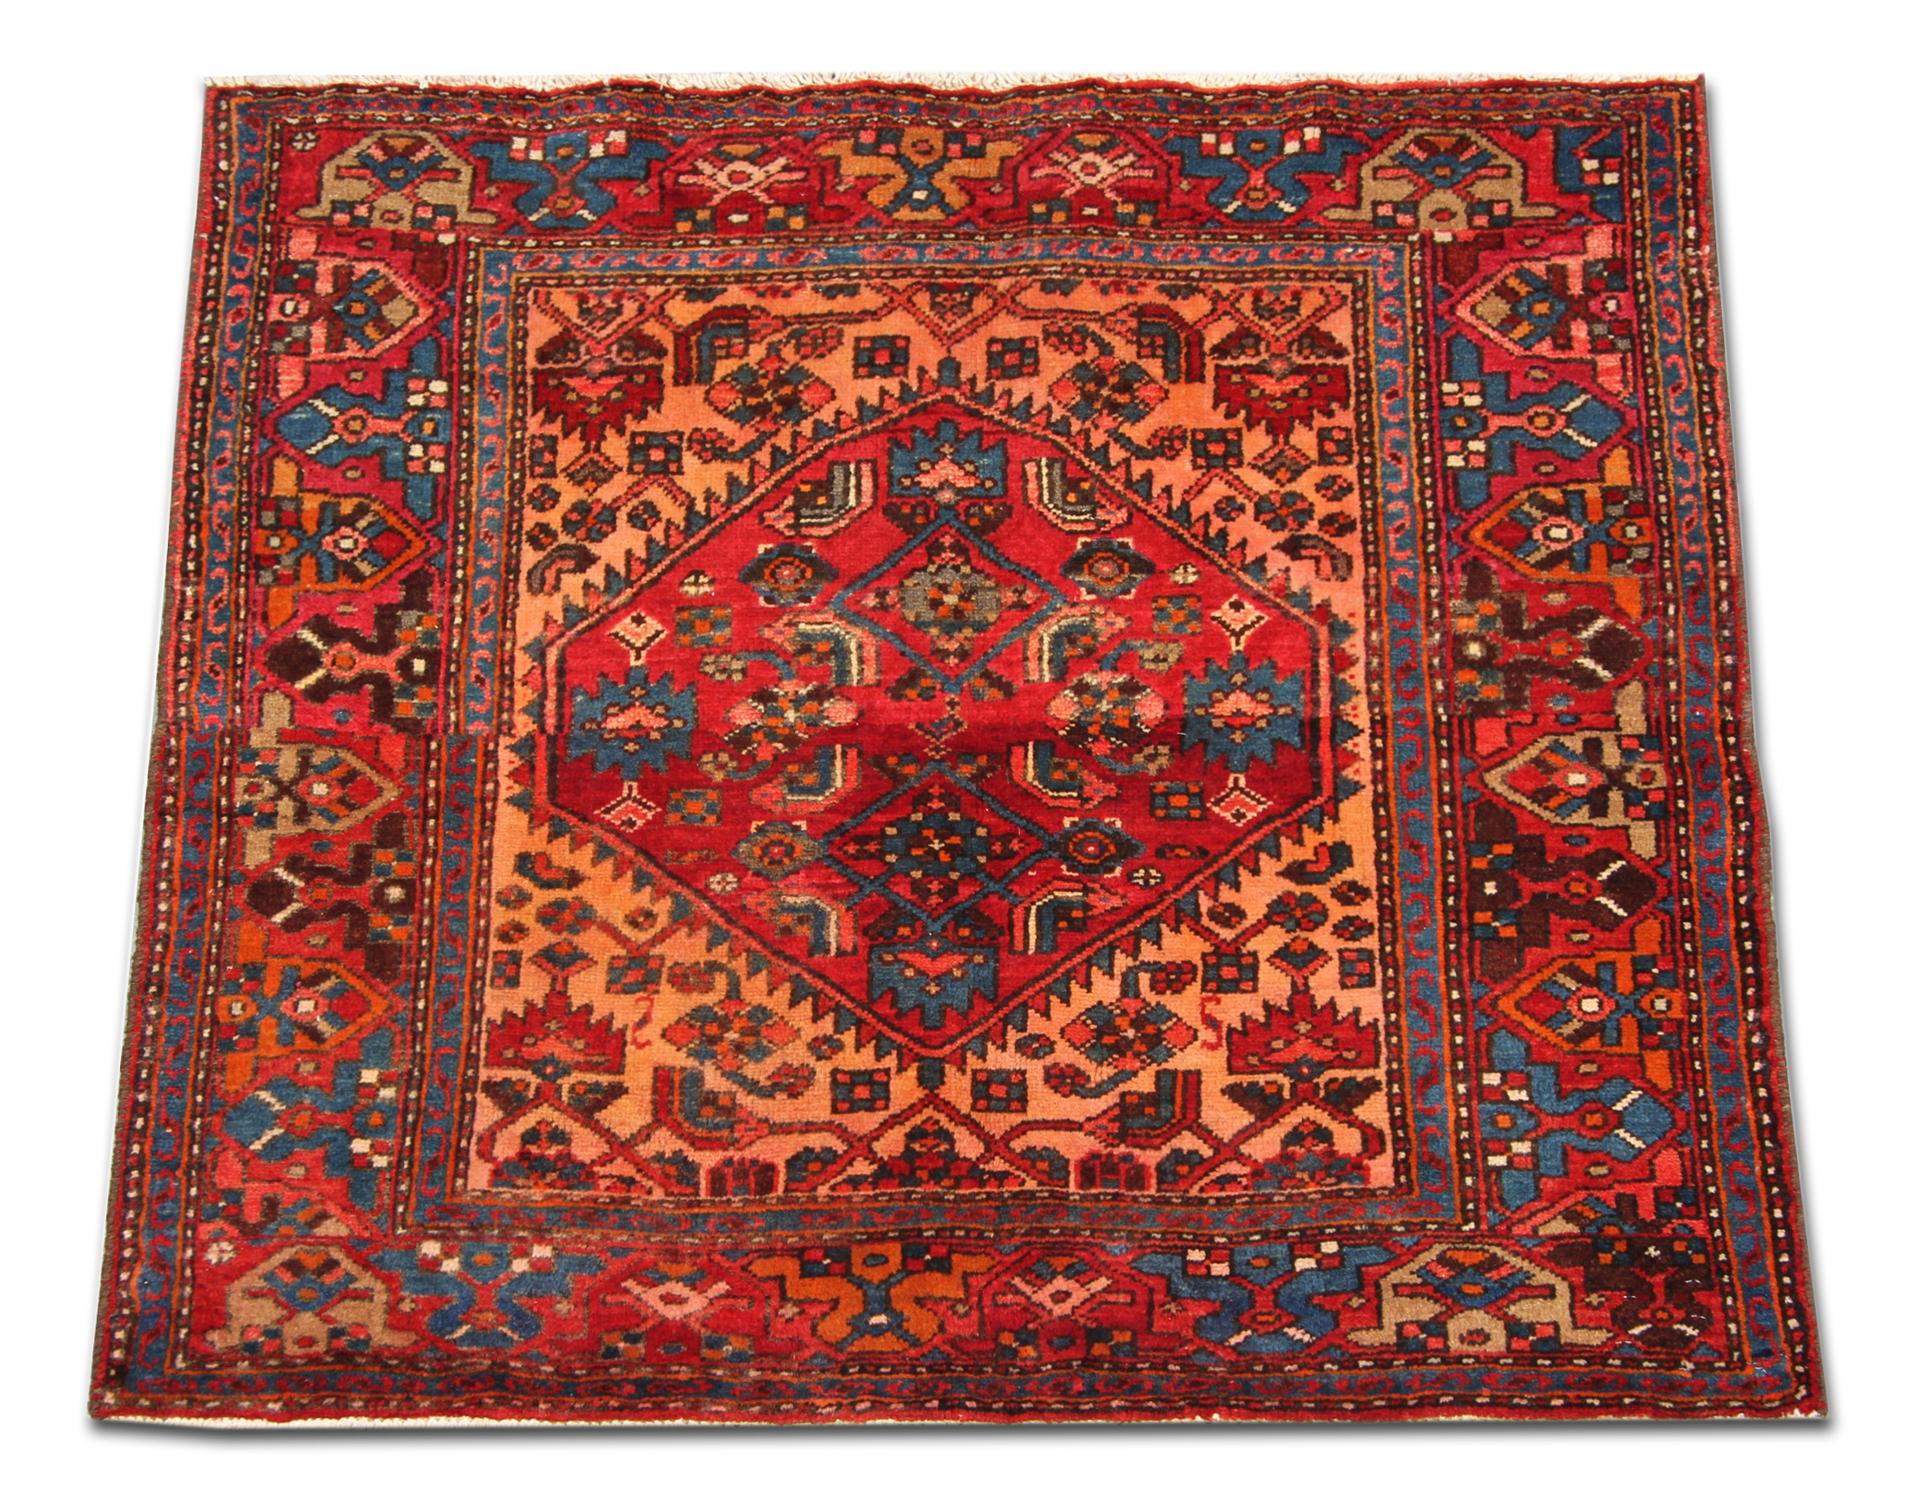 This fine wool rug was woven by hand with fine materials and features a rich colour palette of red, orange, beige and blue, woven into a symmetrical tribal design. The central medallion and surrounding design have been woven with intricate motifs